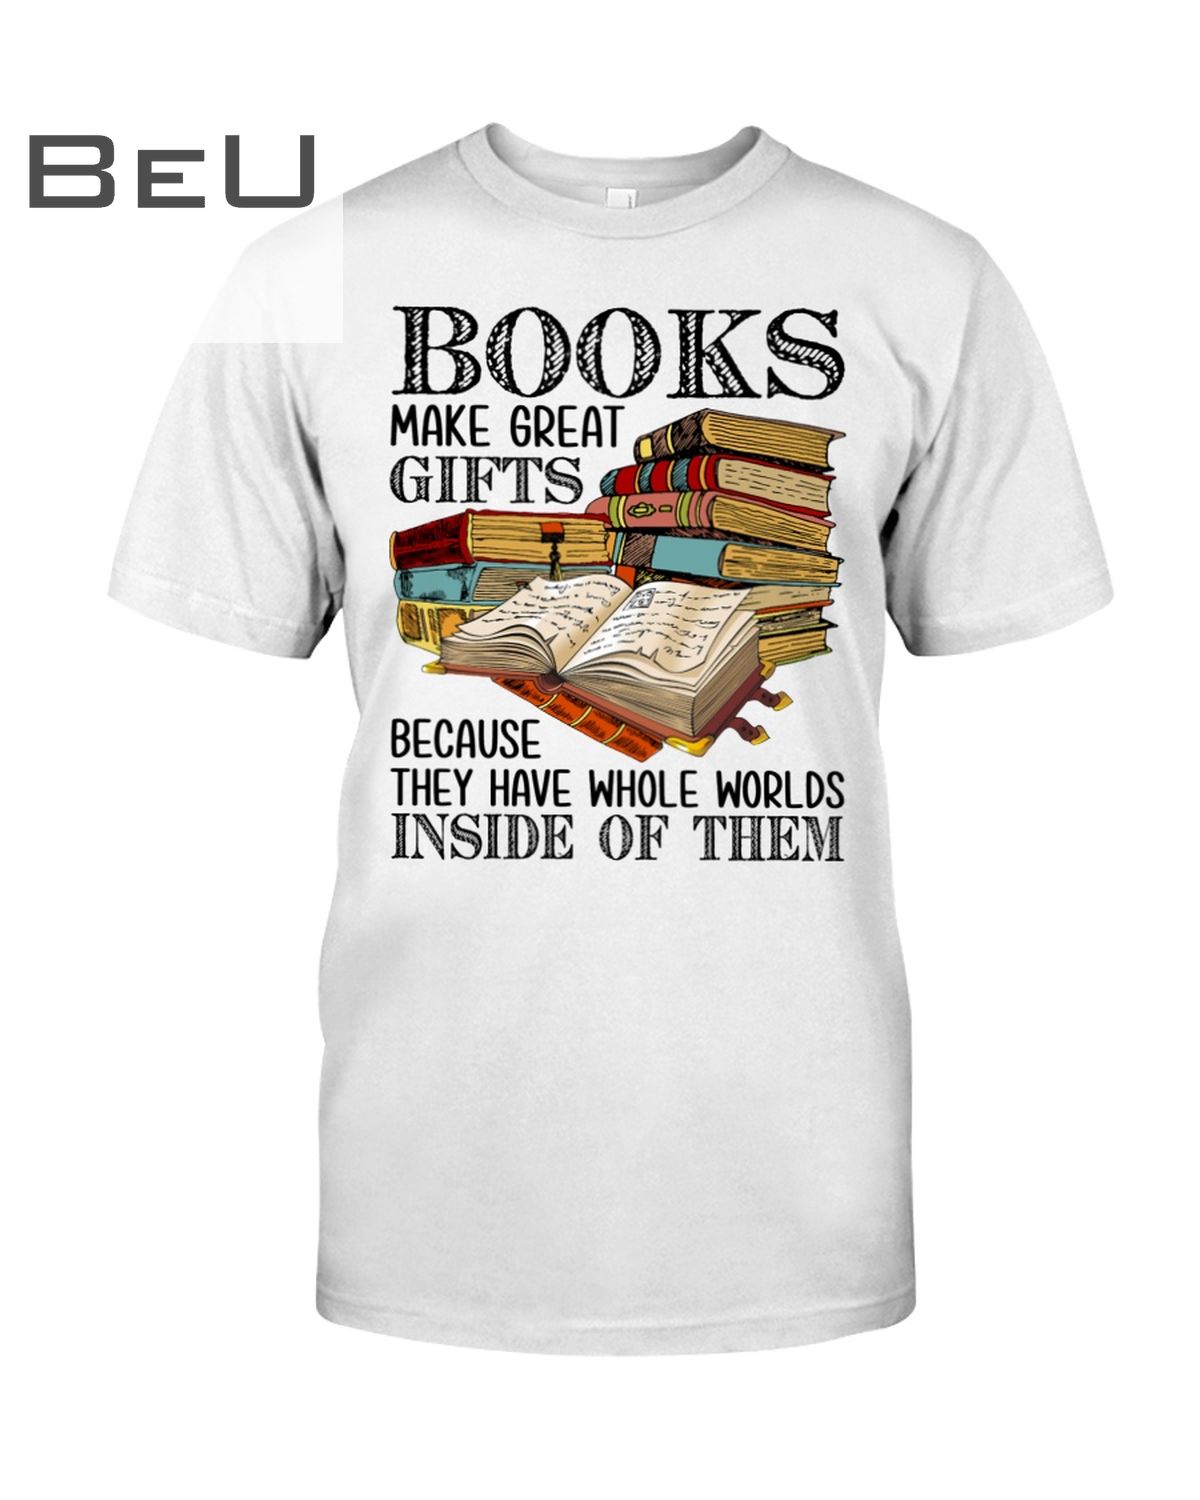 Books Make Great Gifts Because They Have Whole Worlds Inside Of Them Shirt